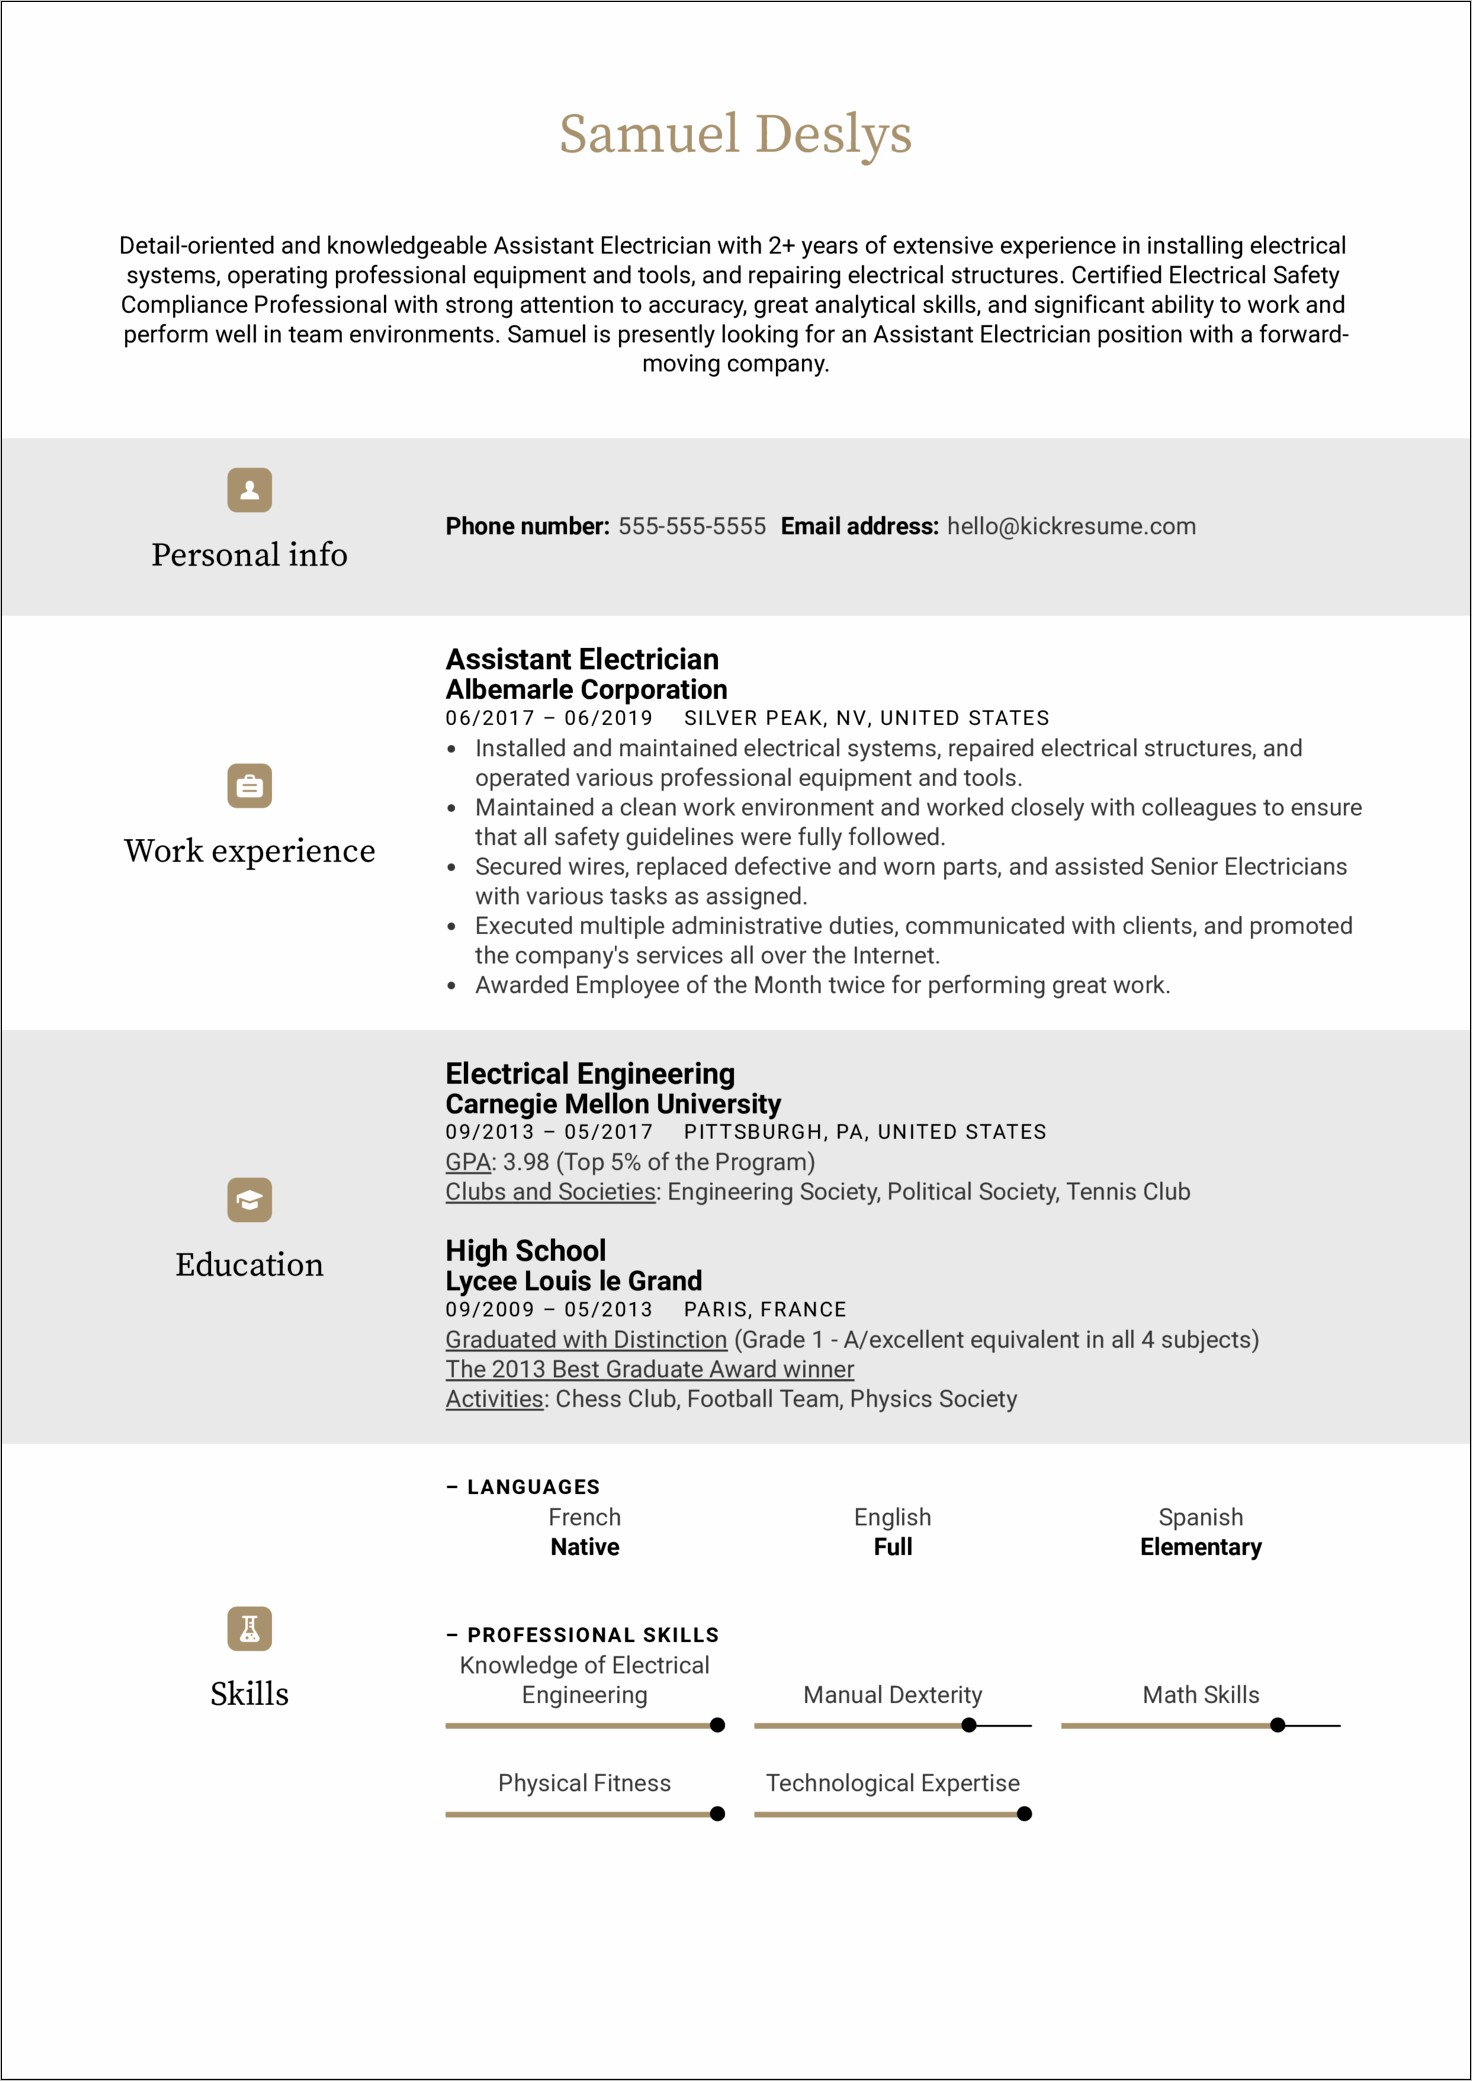 Sample Resumes For Electrical Engineer